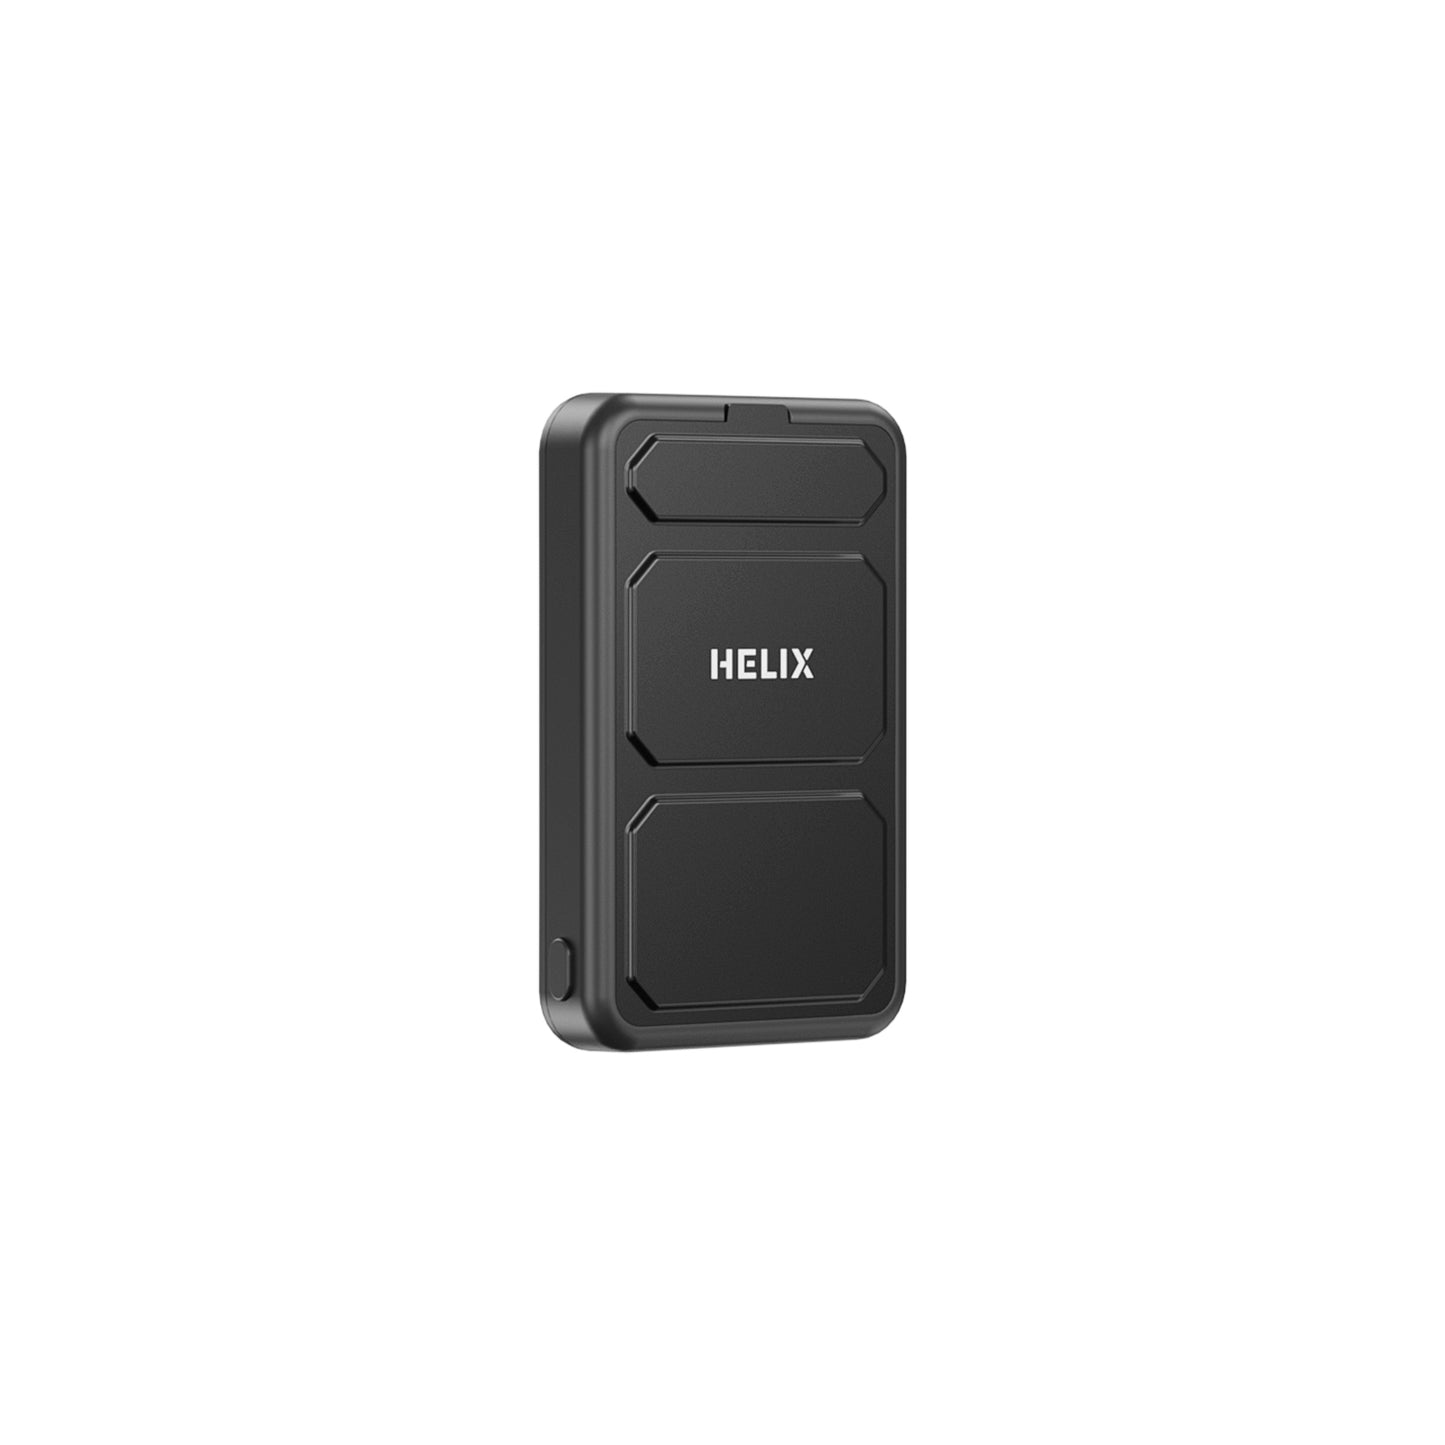 HELIX 22.5W+15W Magnetic Stand Wireless MagSafe Charging Power Bank 10HELIXHELIX